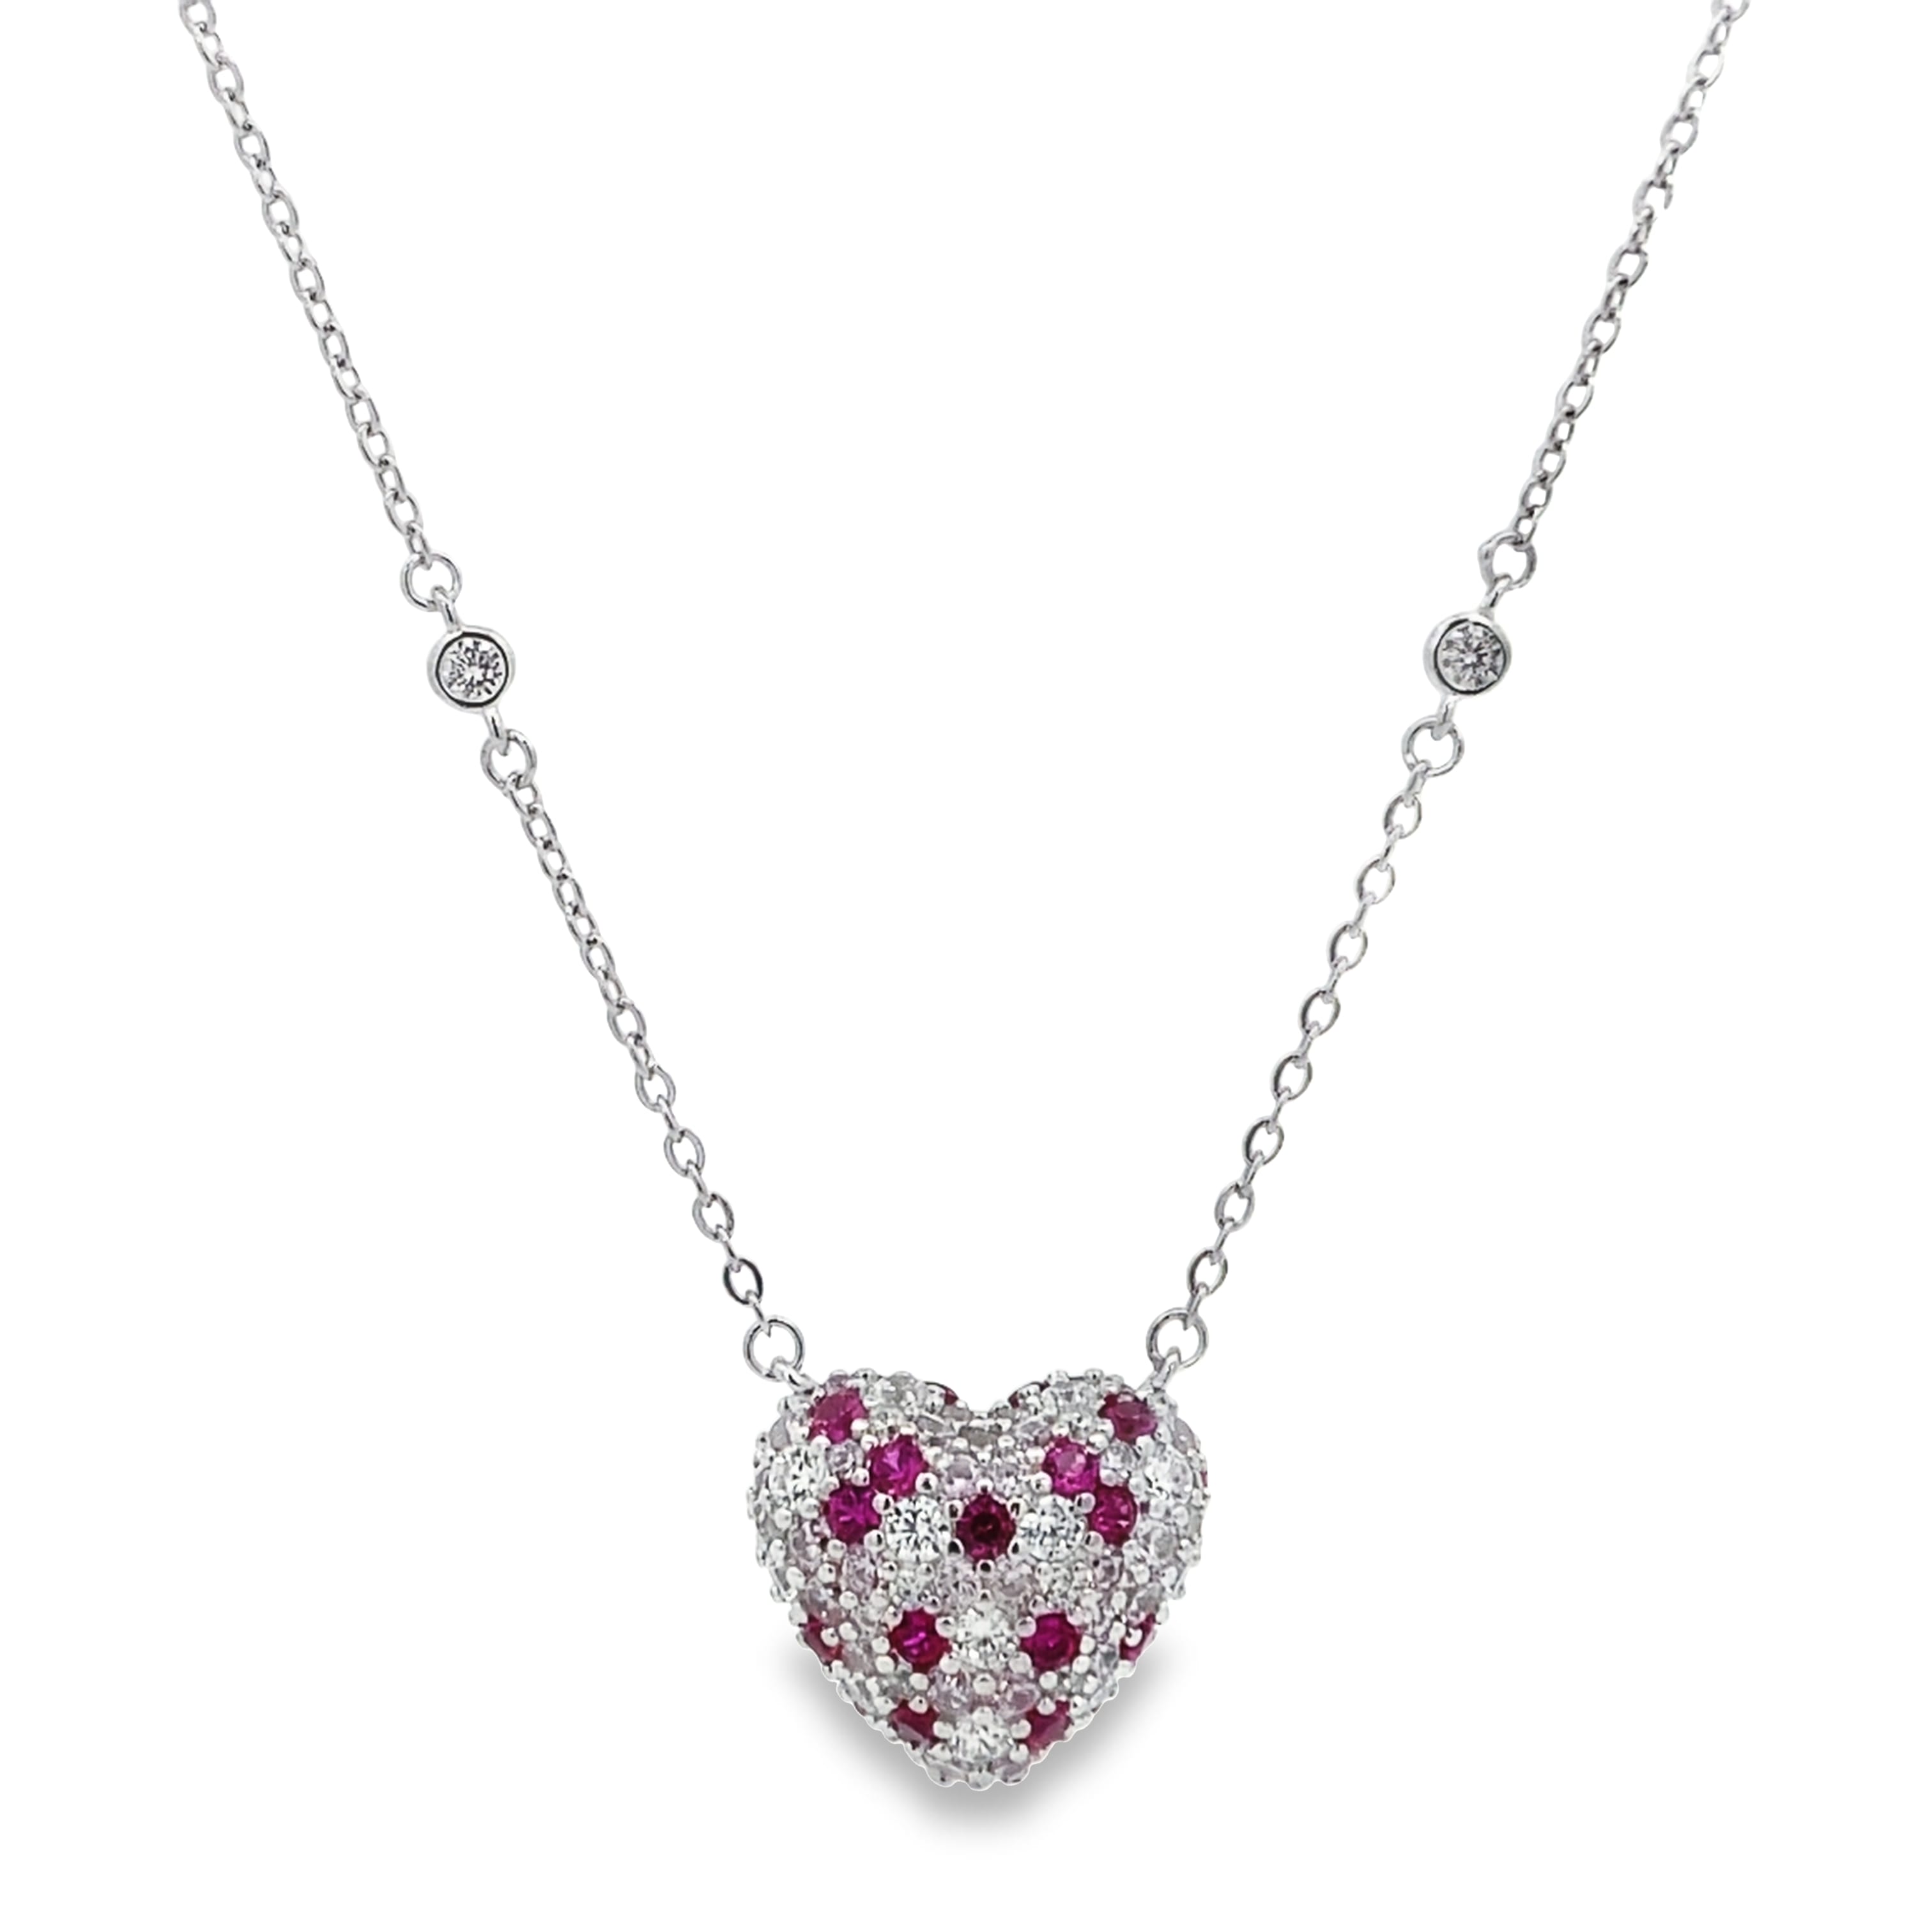 Sparkling Heart Silver Necklace